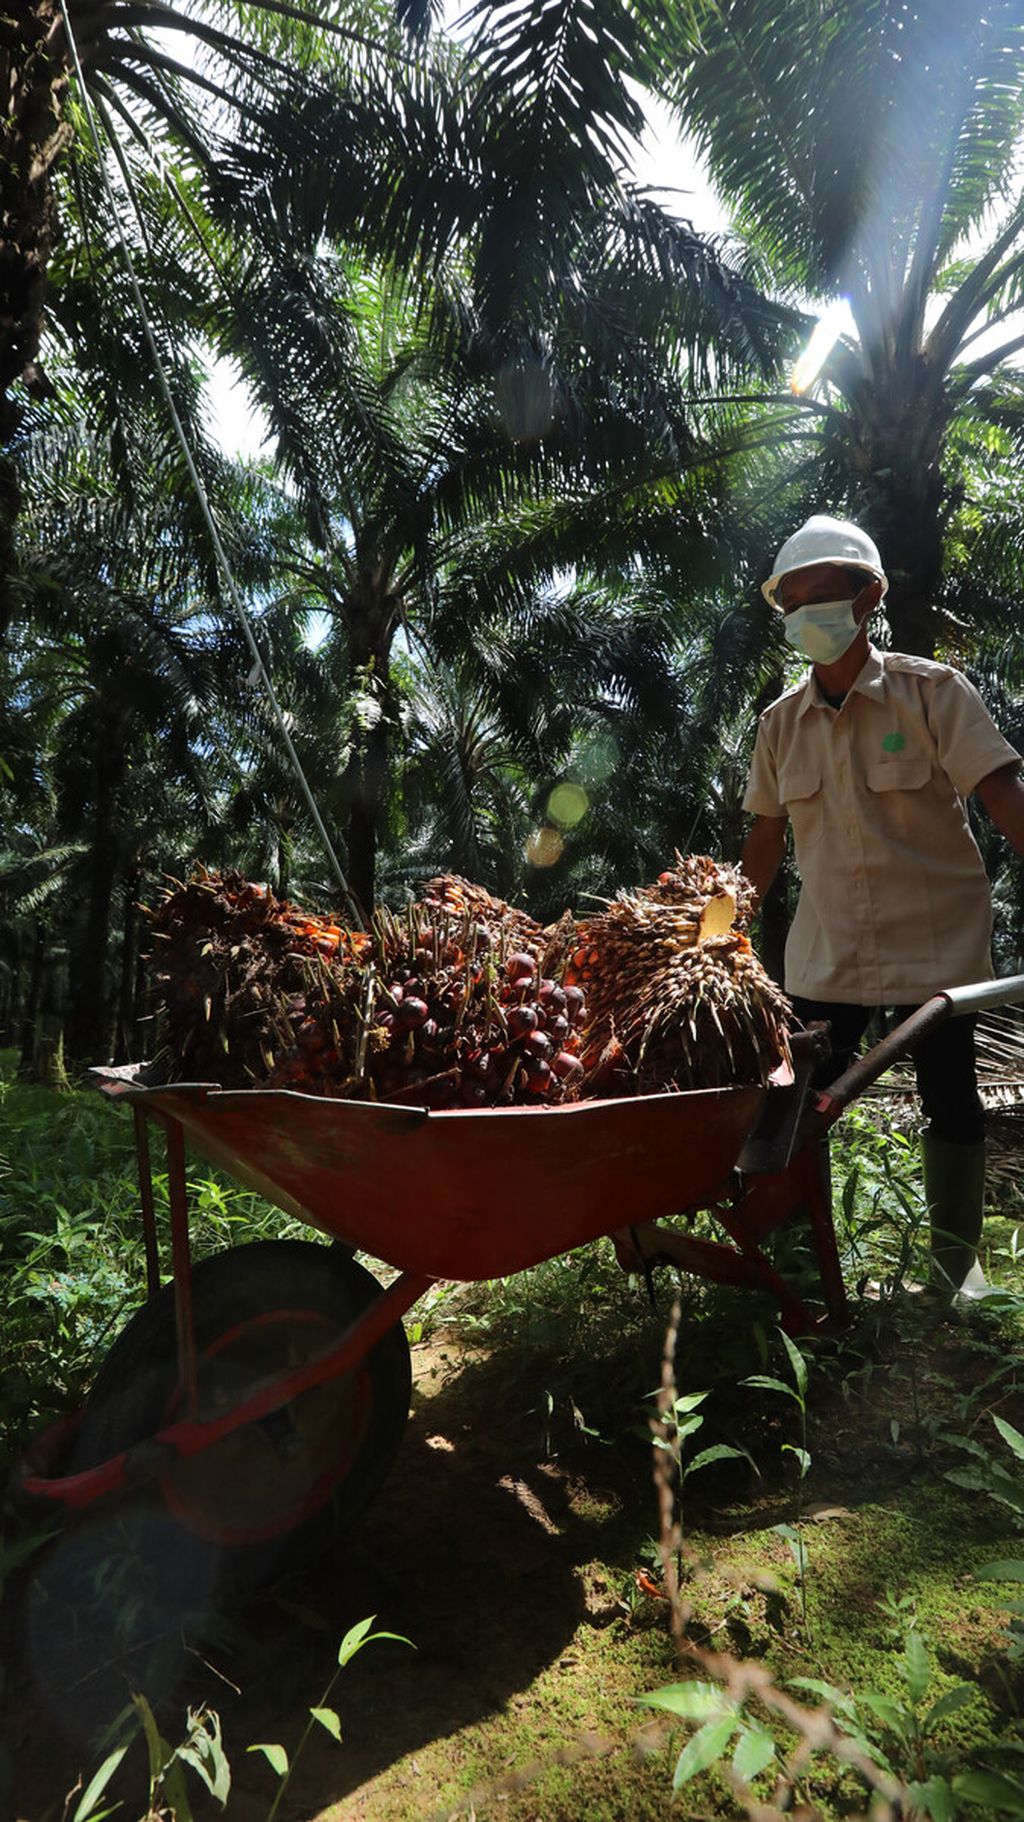 Workers harvest oil palm in the plantation area of ​​PT Sawit Sumbermas Saran Tbk (SSMS) in Pangkalan Bun, Central Kalimantan, Thursday (29/4/2021). PT SSMS produces crude palm oil (CPO) with a production capacity of 2,500 tons per day. Downstream PT SSMS has produced CPO derivative products in the form of olein (cooking oil), stearin (basic ingredients for cakes and cosmetics), RBDPO (refined, bleached, and deodorized palm oil), and PFAD (palm fatty acid distillate) or distillated palm fatty acid. PT SSMS manages a concession area of ​​116,029 hectares consisting of 23 nucleus and plasma plantations of 81,485 hectares. PT SSMS's plantation and mill are RSPO certified. Its derivative products penetrate export markets to China, Bangladesh, India and Pakistan.